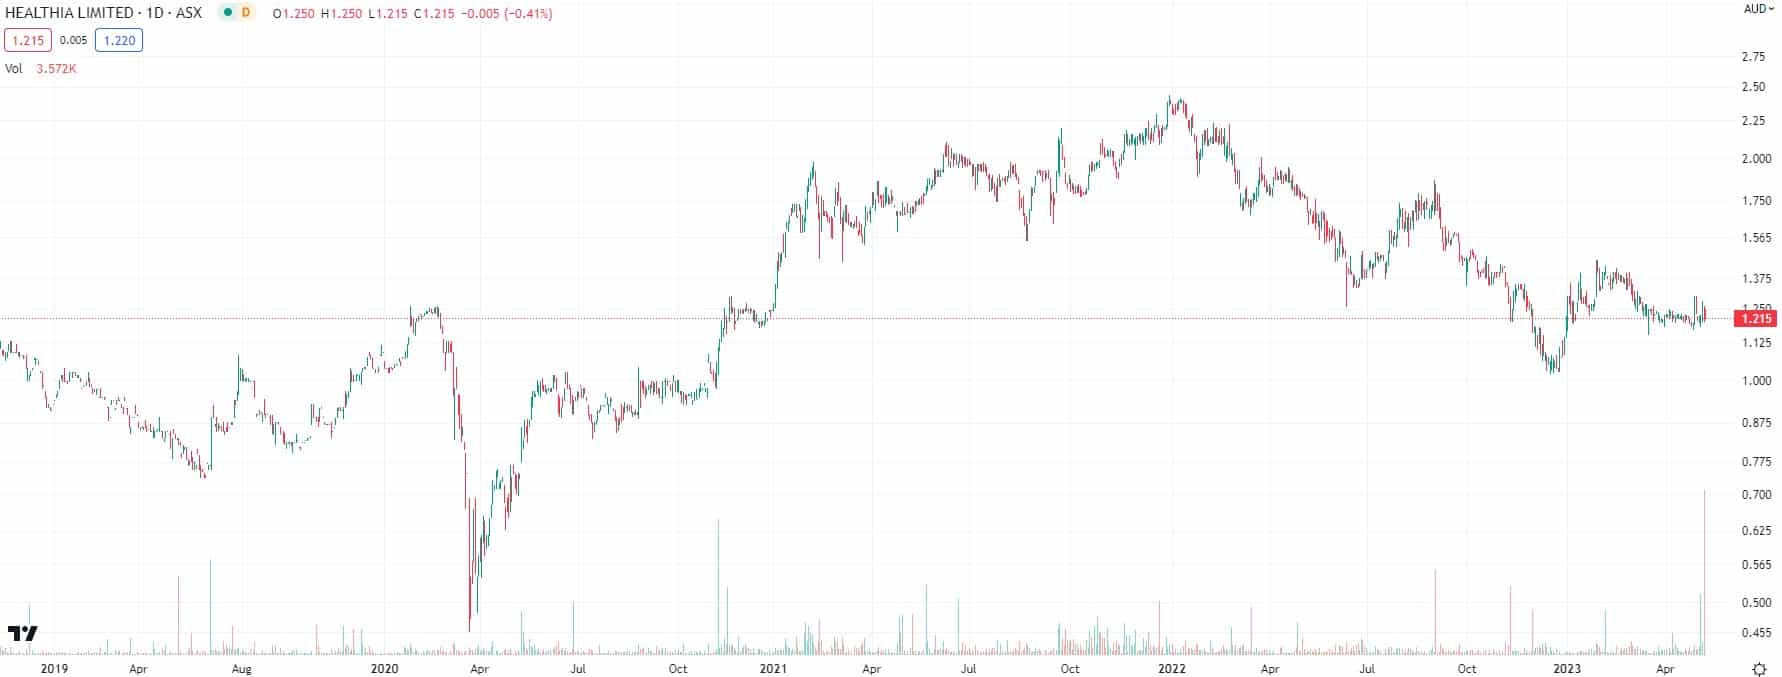 Healthia (ASX:HLA) is not sexy, but could deliver some dazzling returns in FY24 1